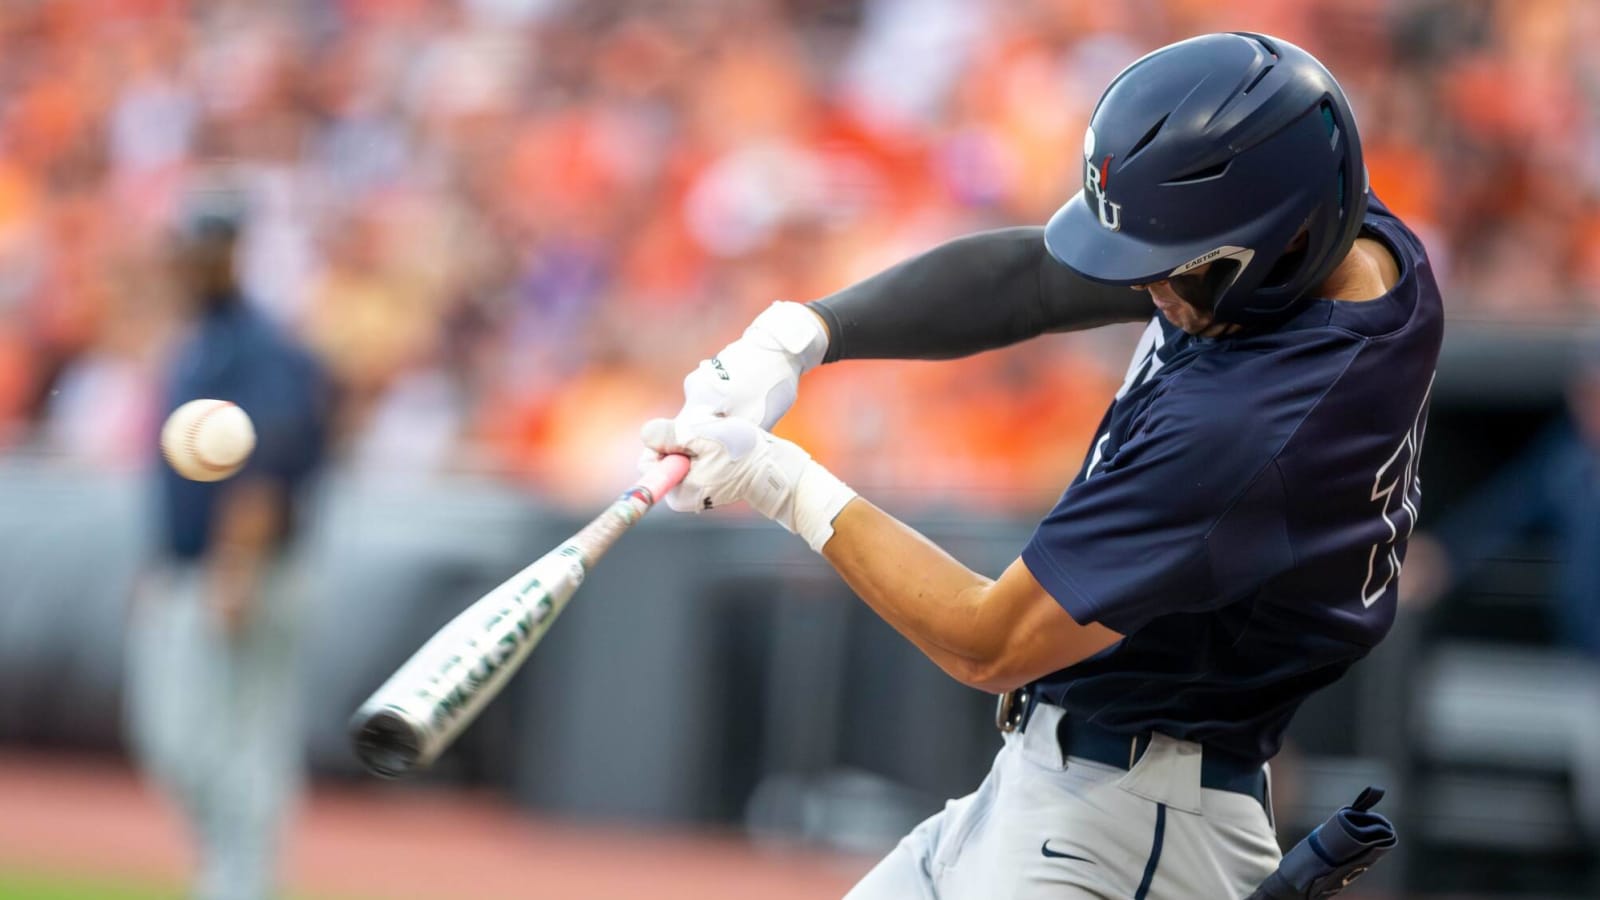 Watch: Oral Roberts hits first CWS inside-the-park homer in 20 years